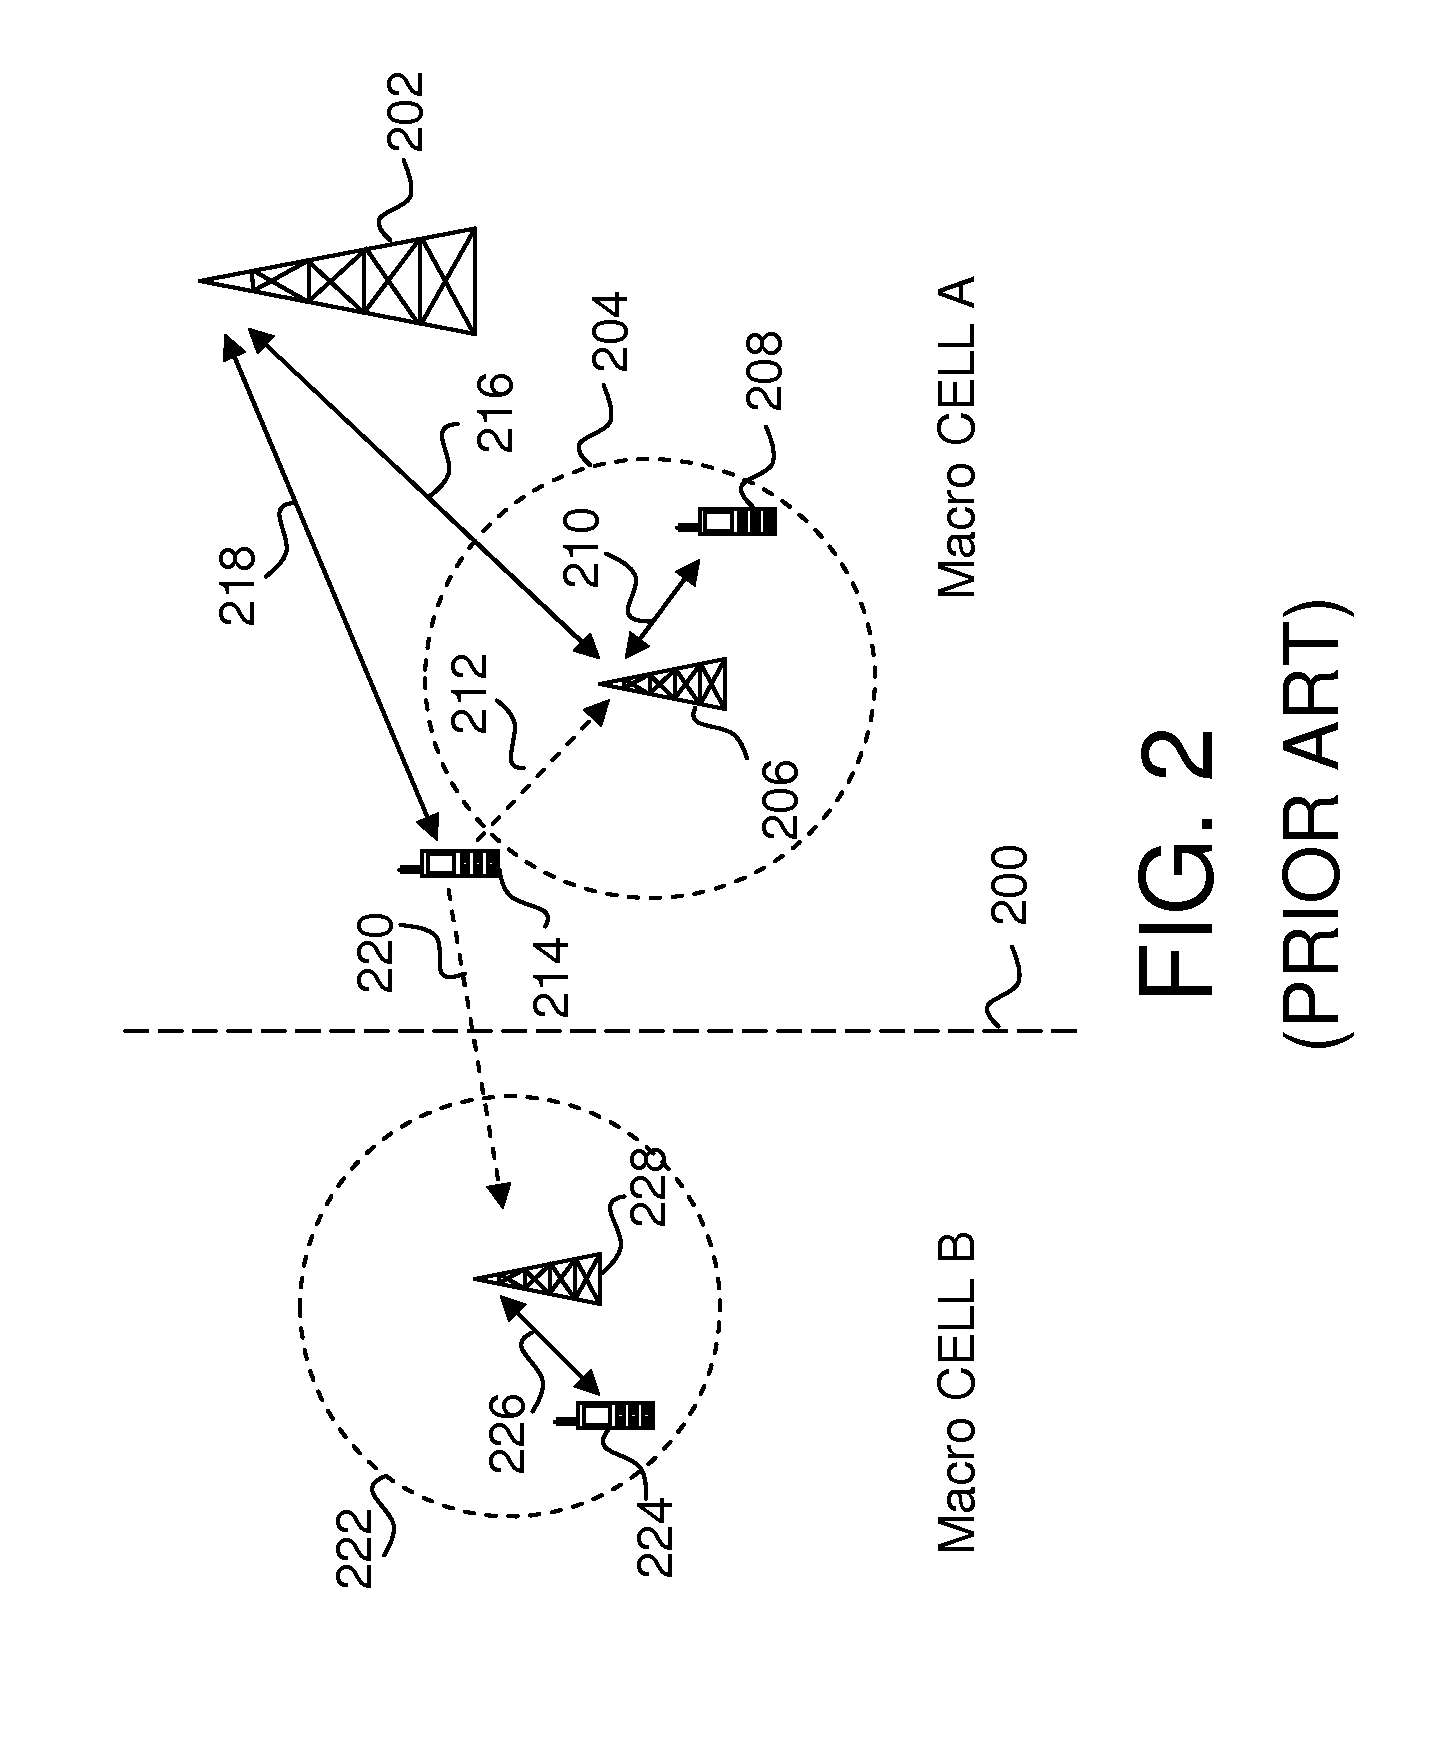 Uplink signaling for cooperative multipoint communication